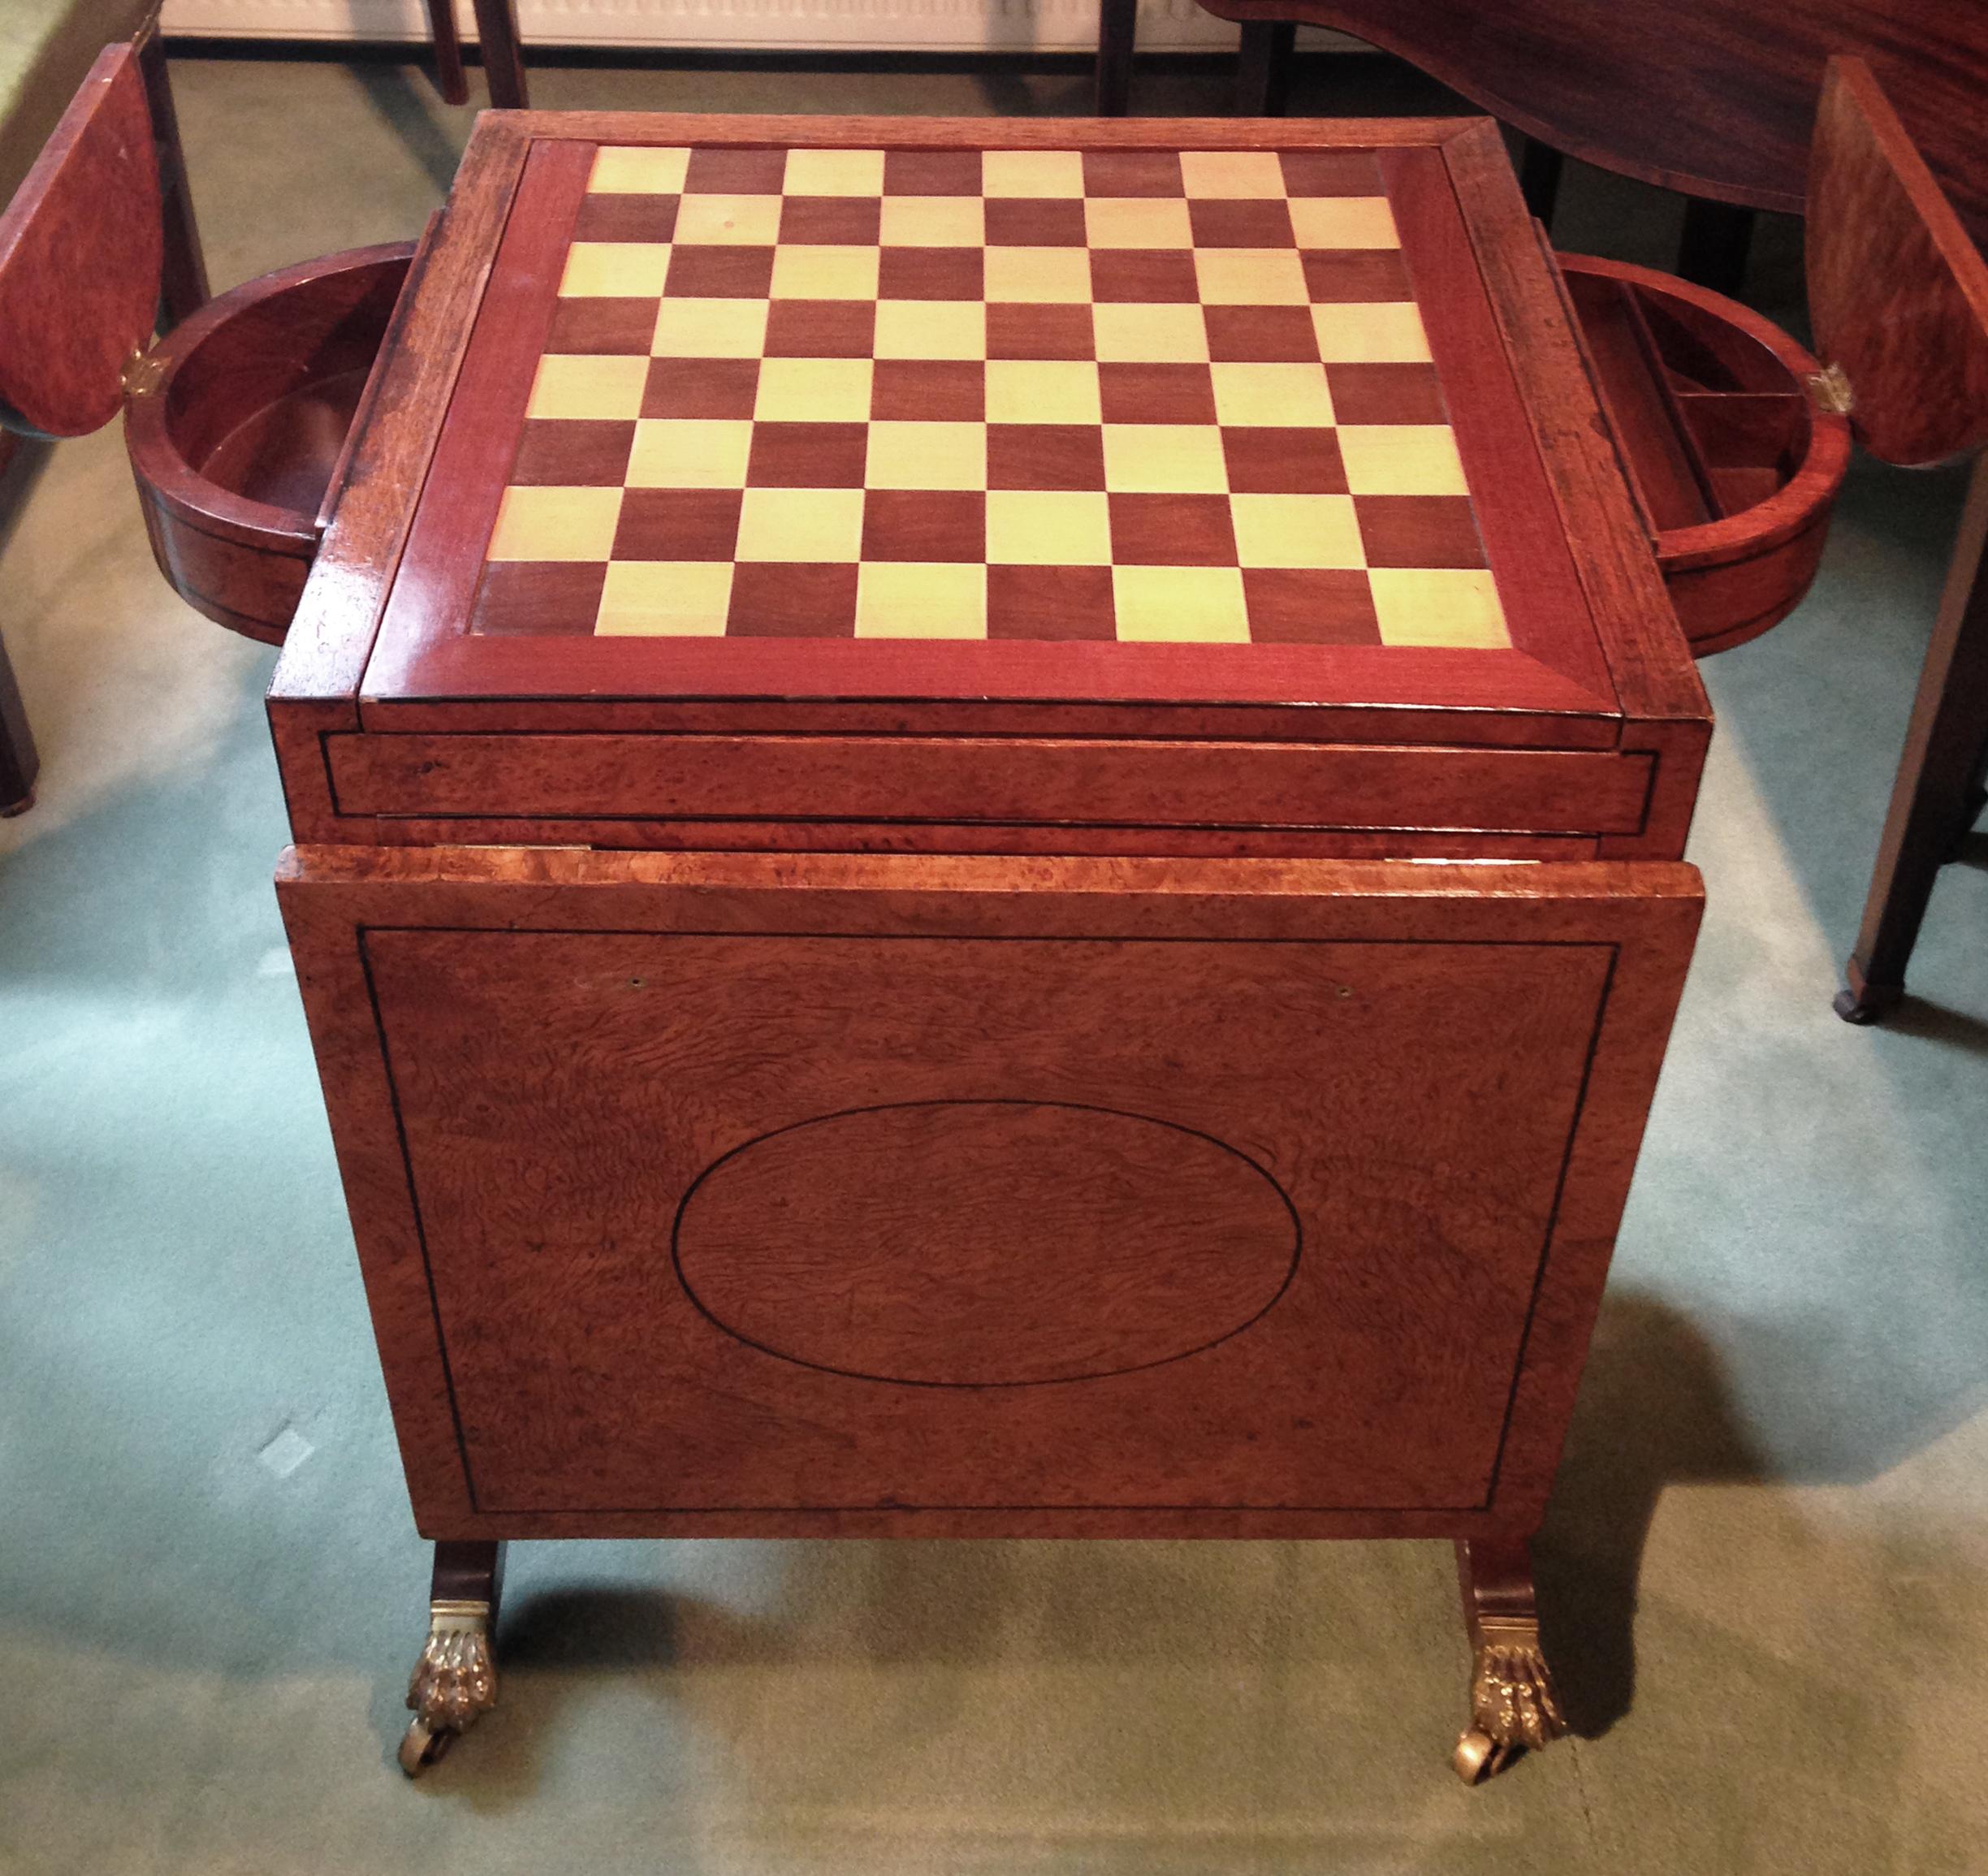 Polished Early 19th Century Regency Period Yew Work or Games Table For Sale